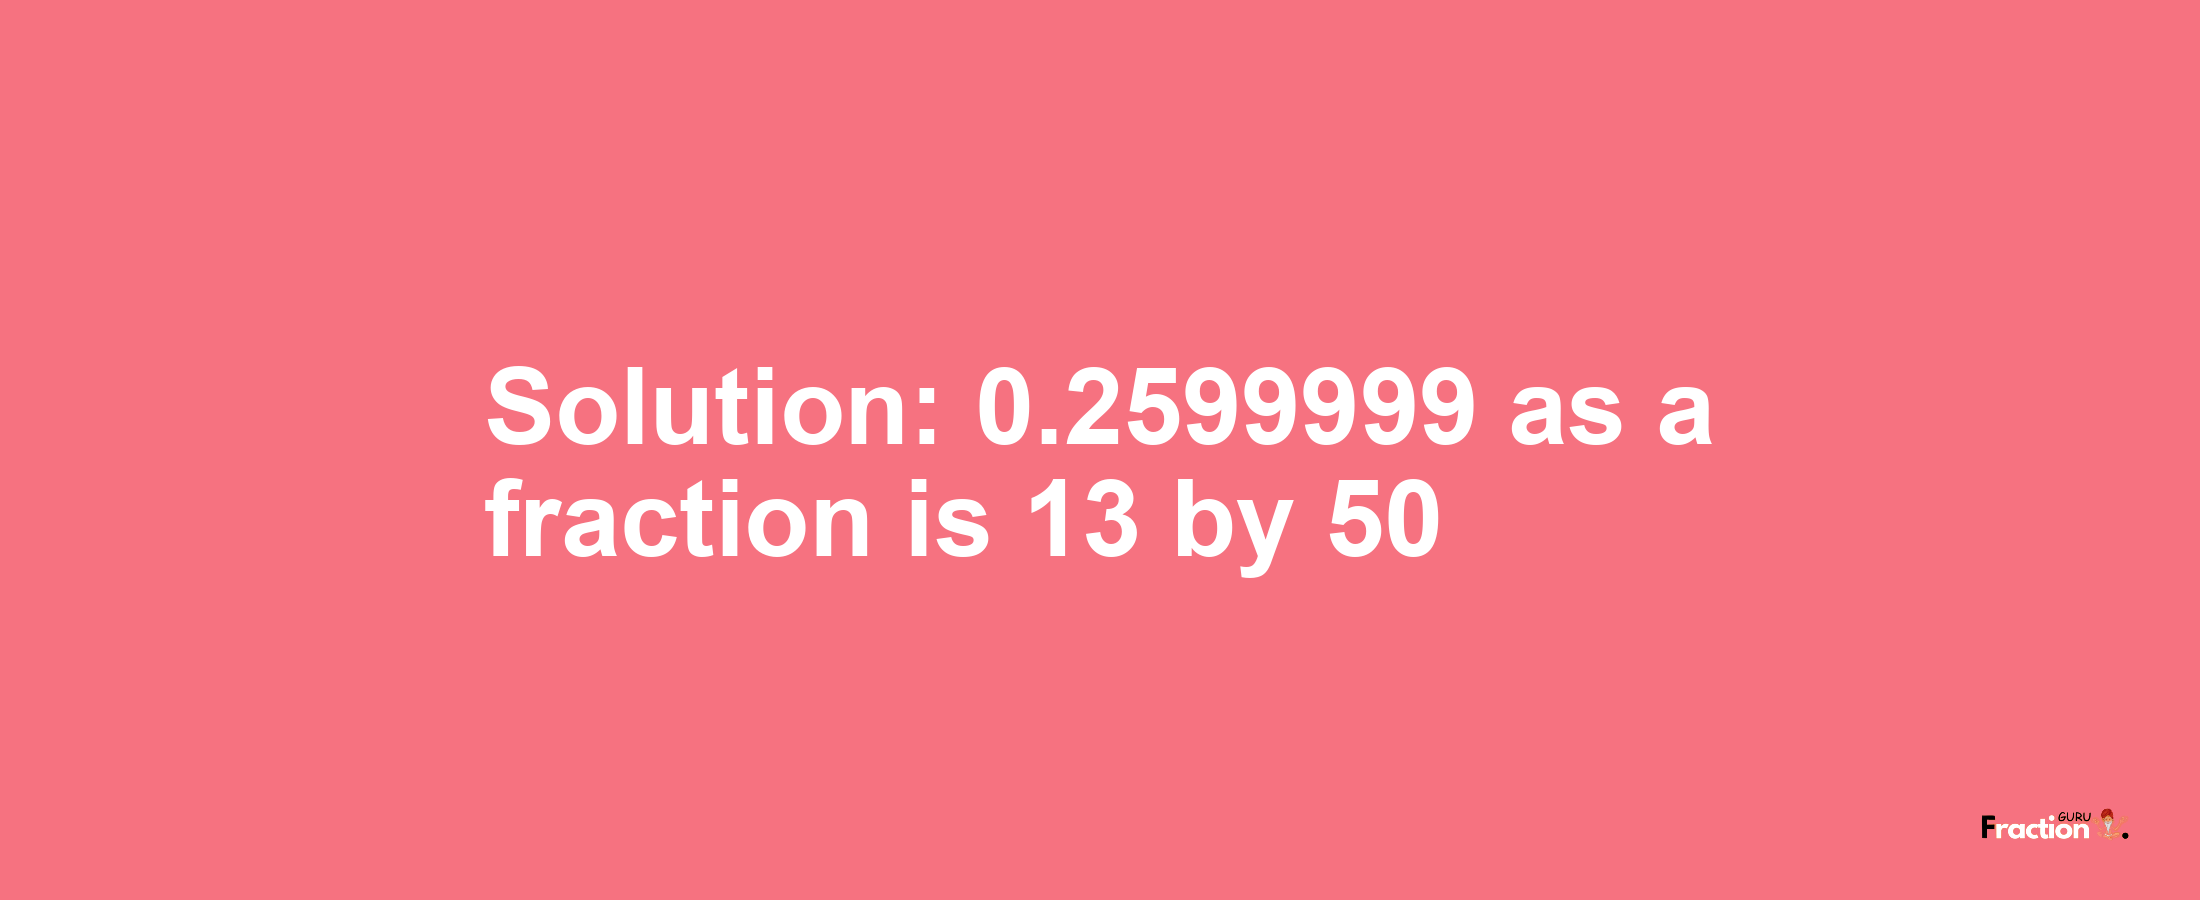 Solution:0.2599999 as a fraction is 13/50